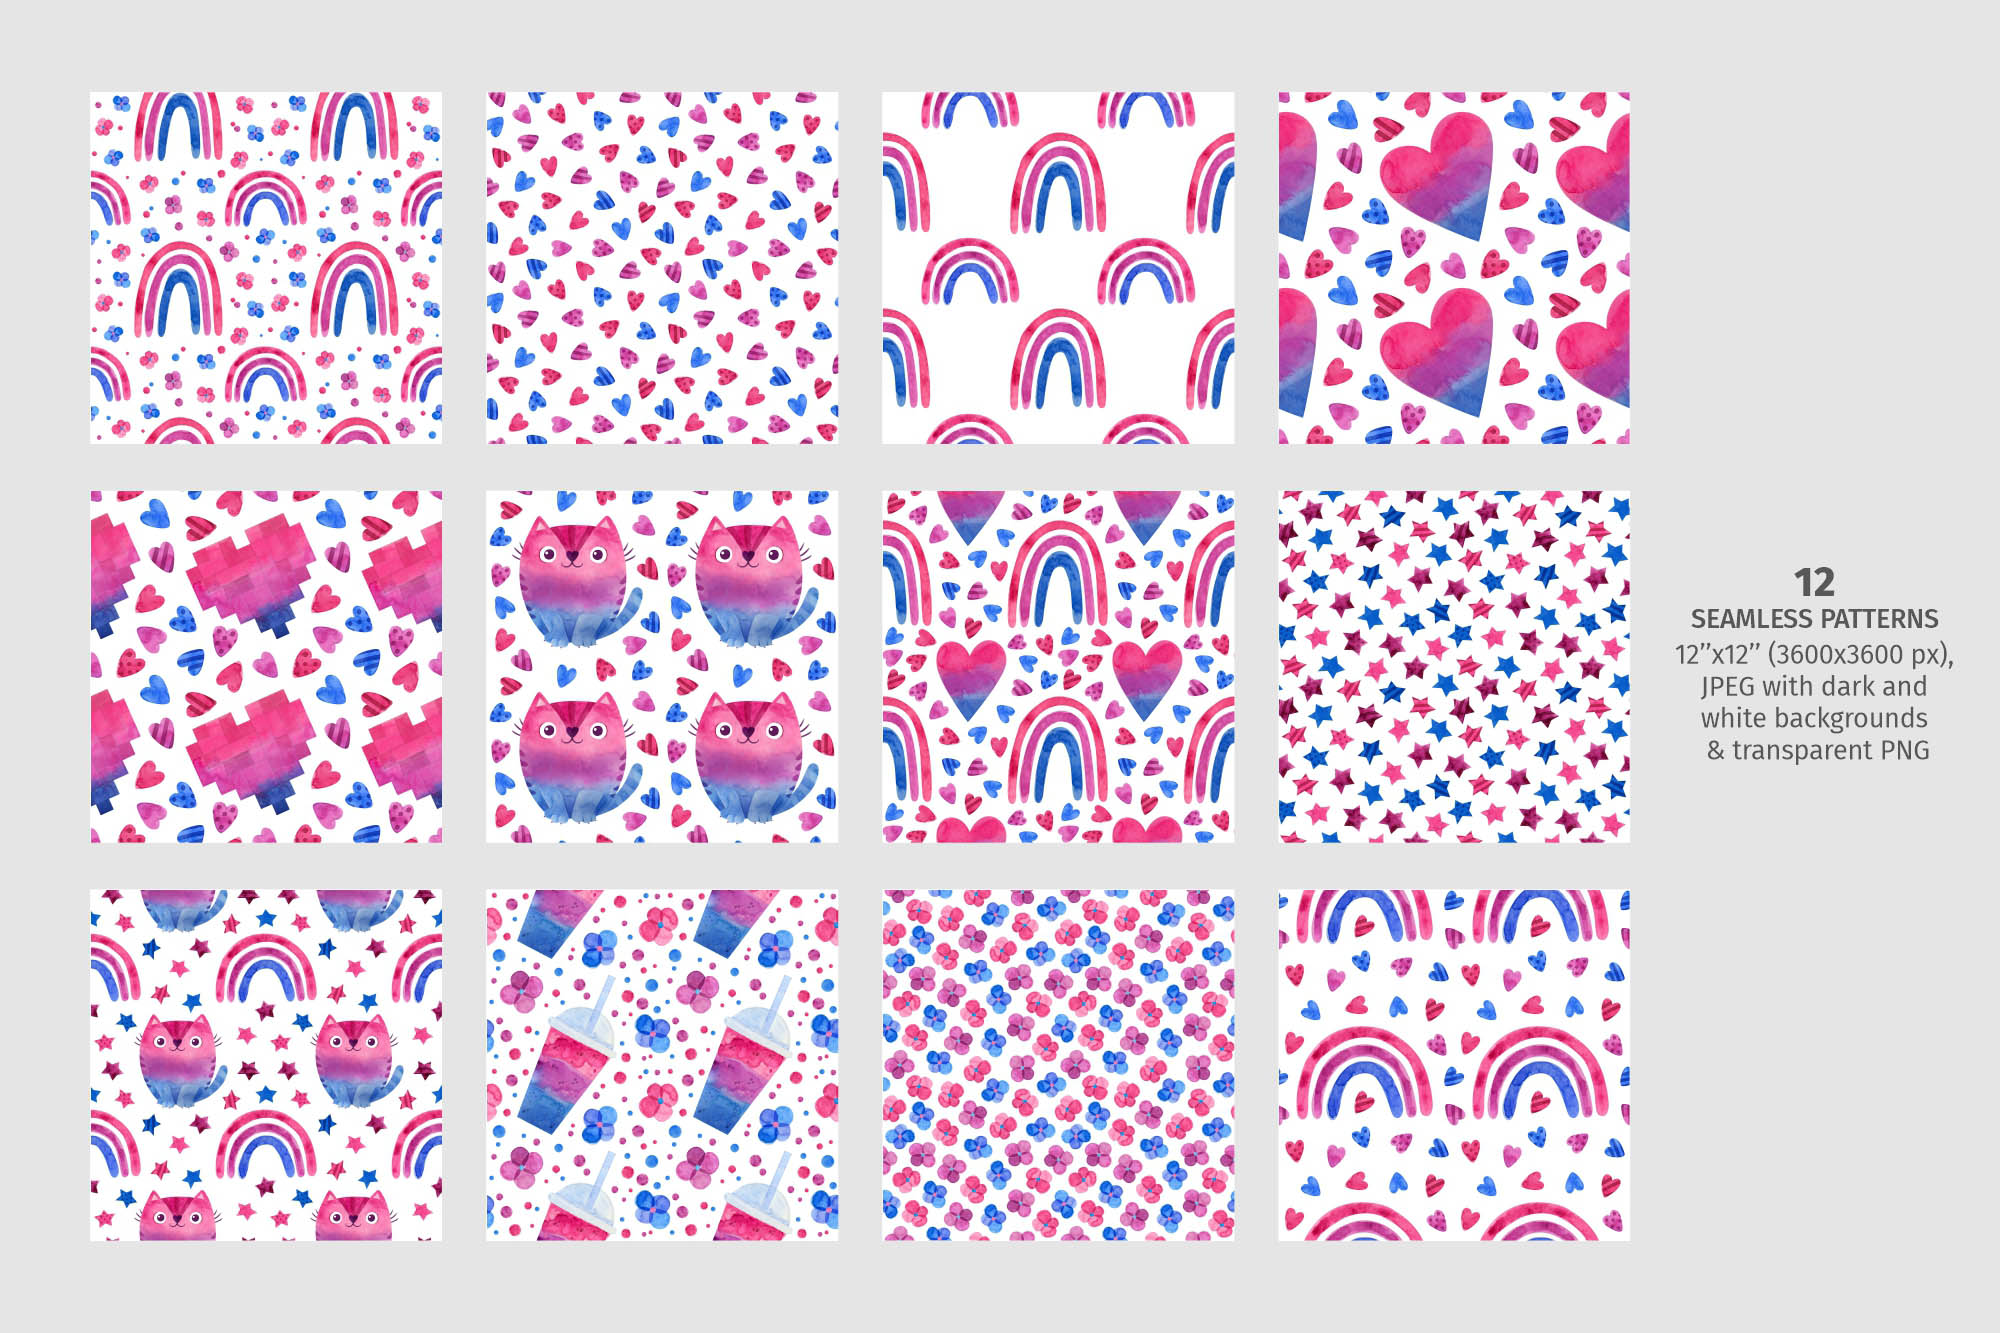 Bisexual pride watercolor clipart and seamless patterns white style.